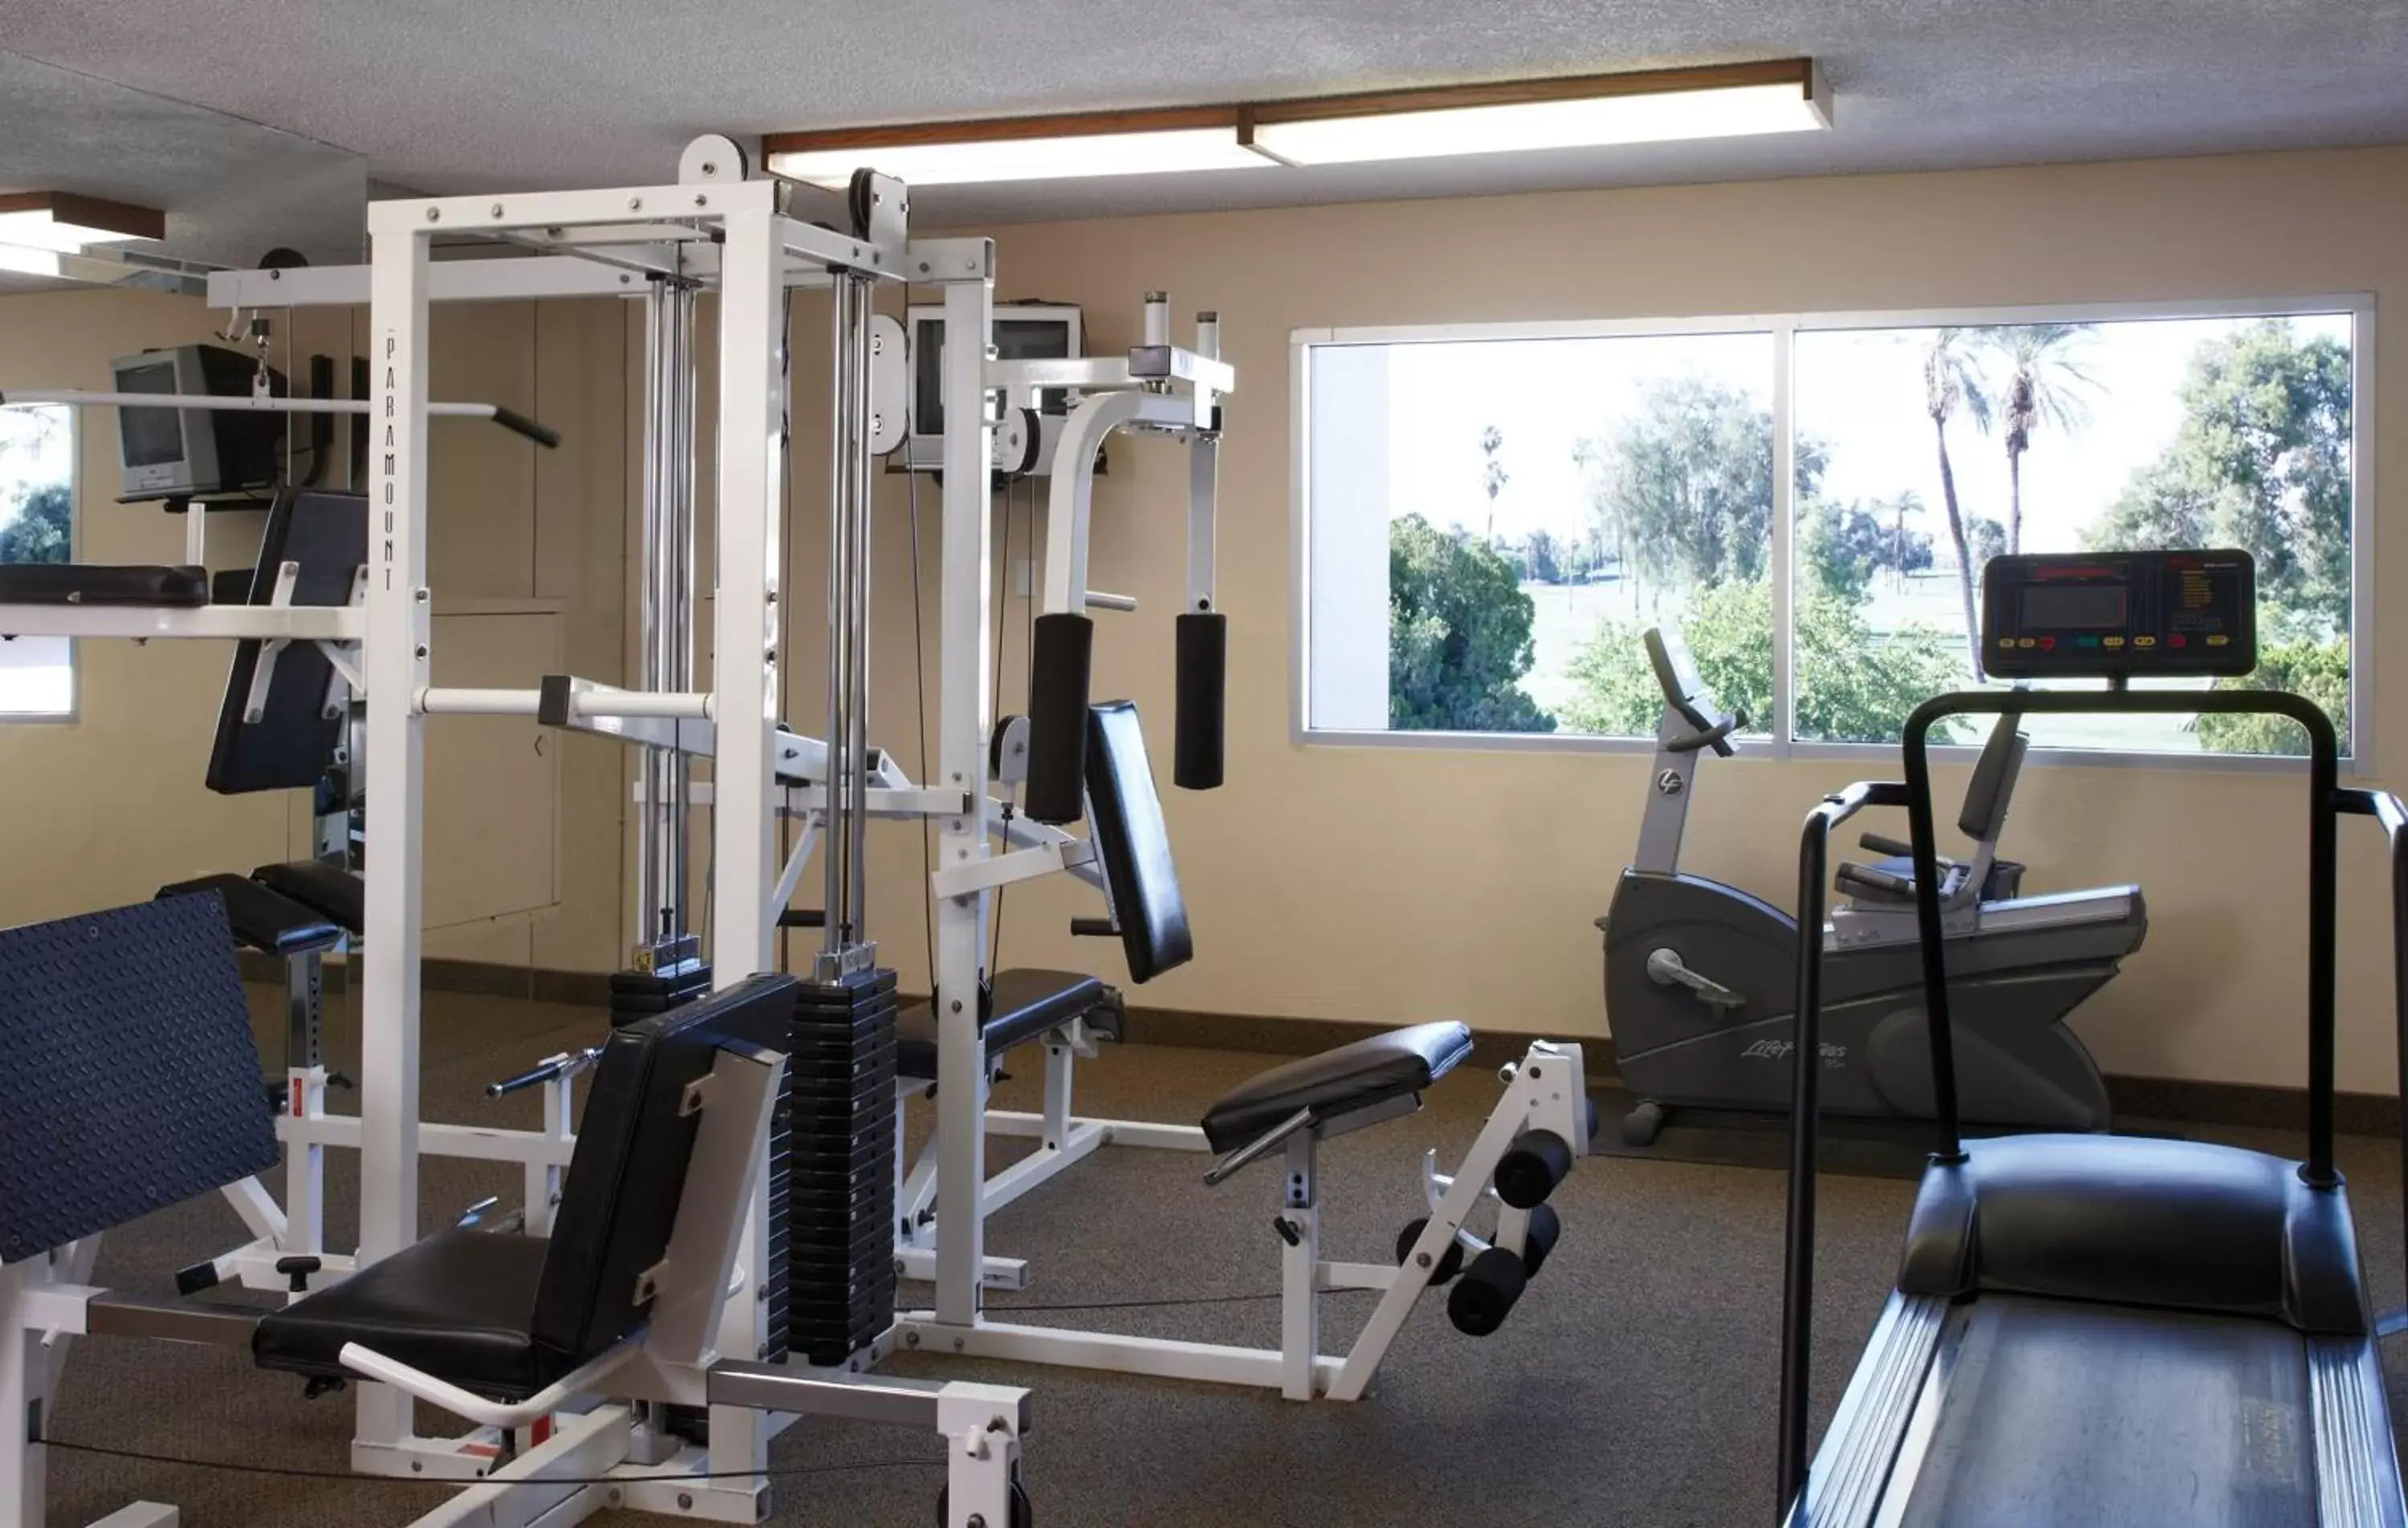 Fitness centre/facilities, Fitness Center/Facilities in WorldMark Palm Springs - Plaza Resort and Spa